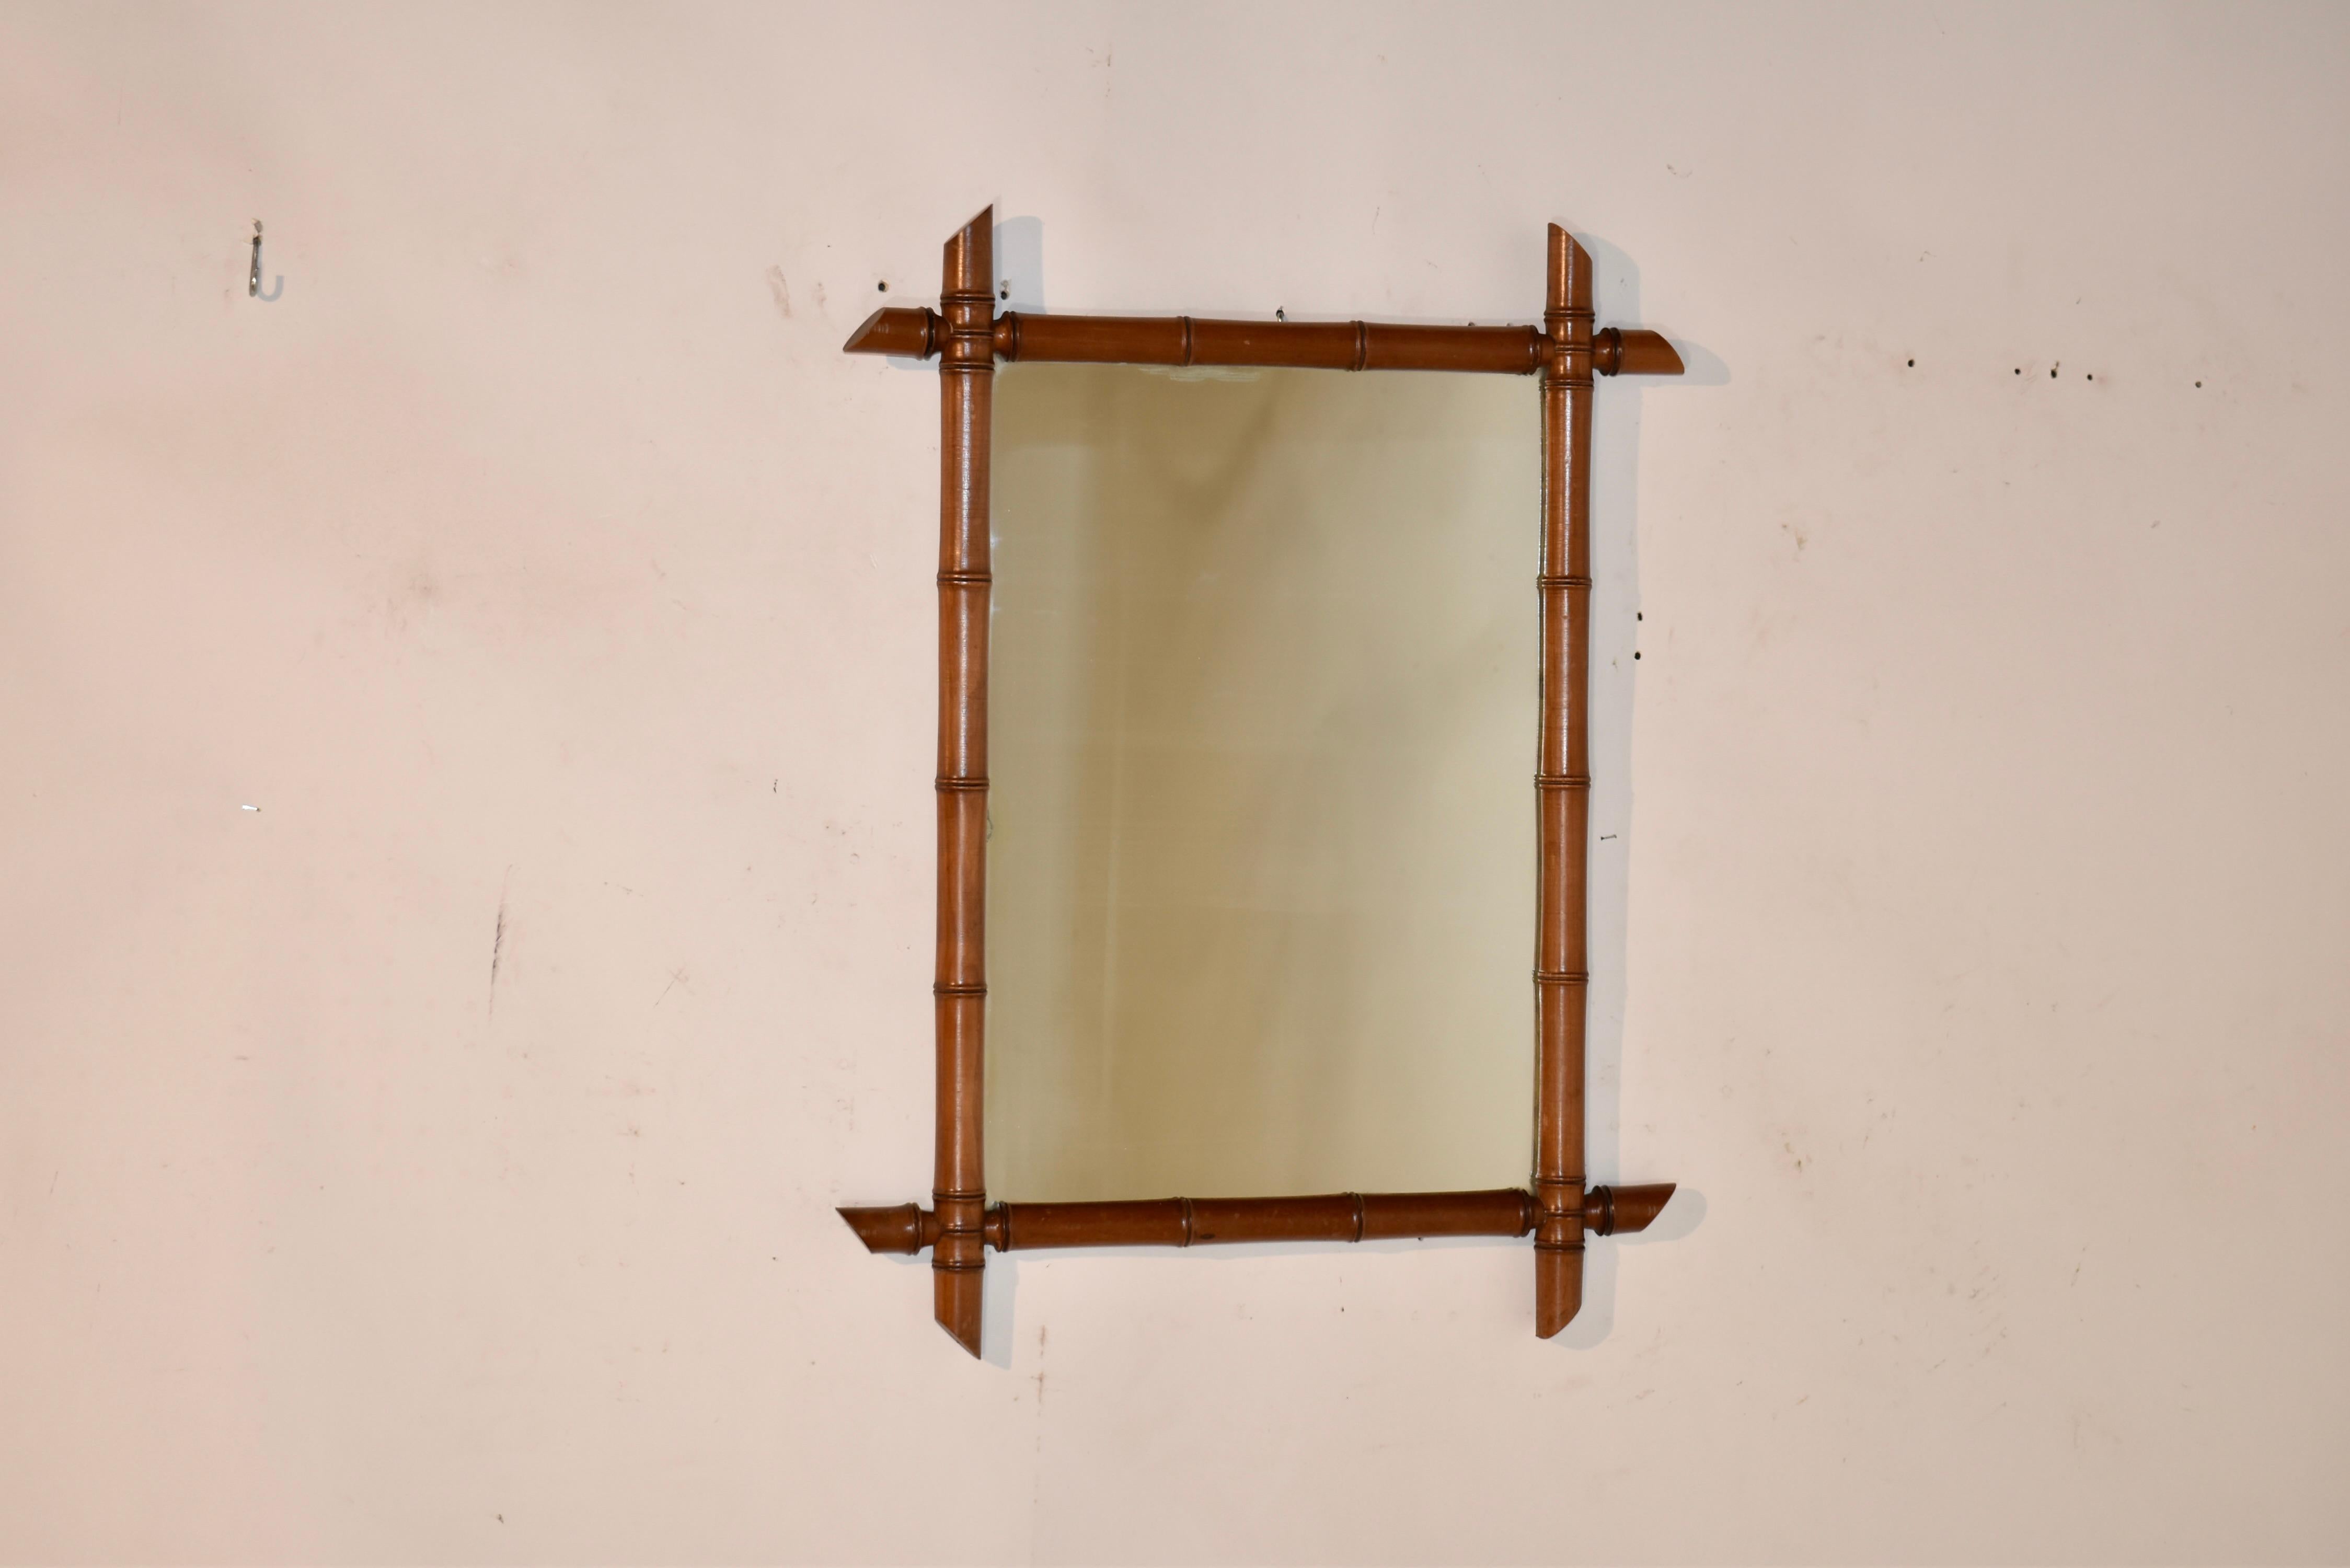 Late 19th century faux bamboo turned cherry frame from France, surrounding a mirror.  The turnings are hand turned and are lovely in shape and size.  These mirrors make wonderful accessories for any type of decor.